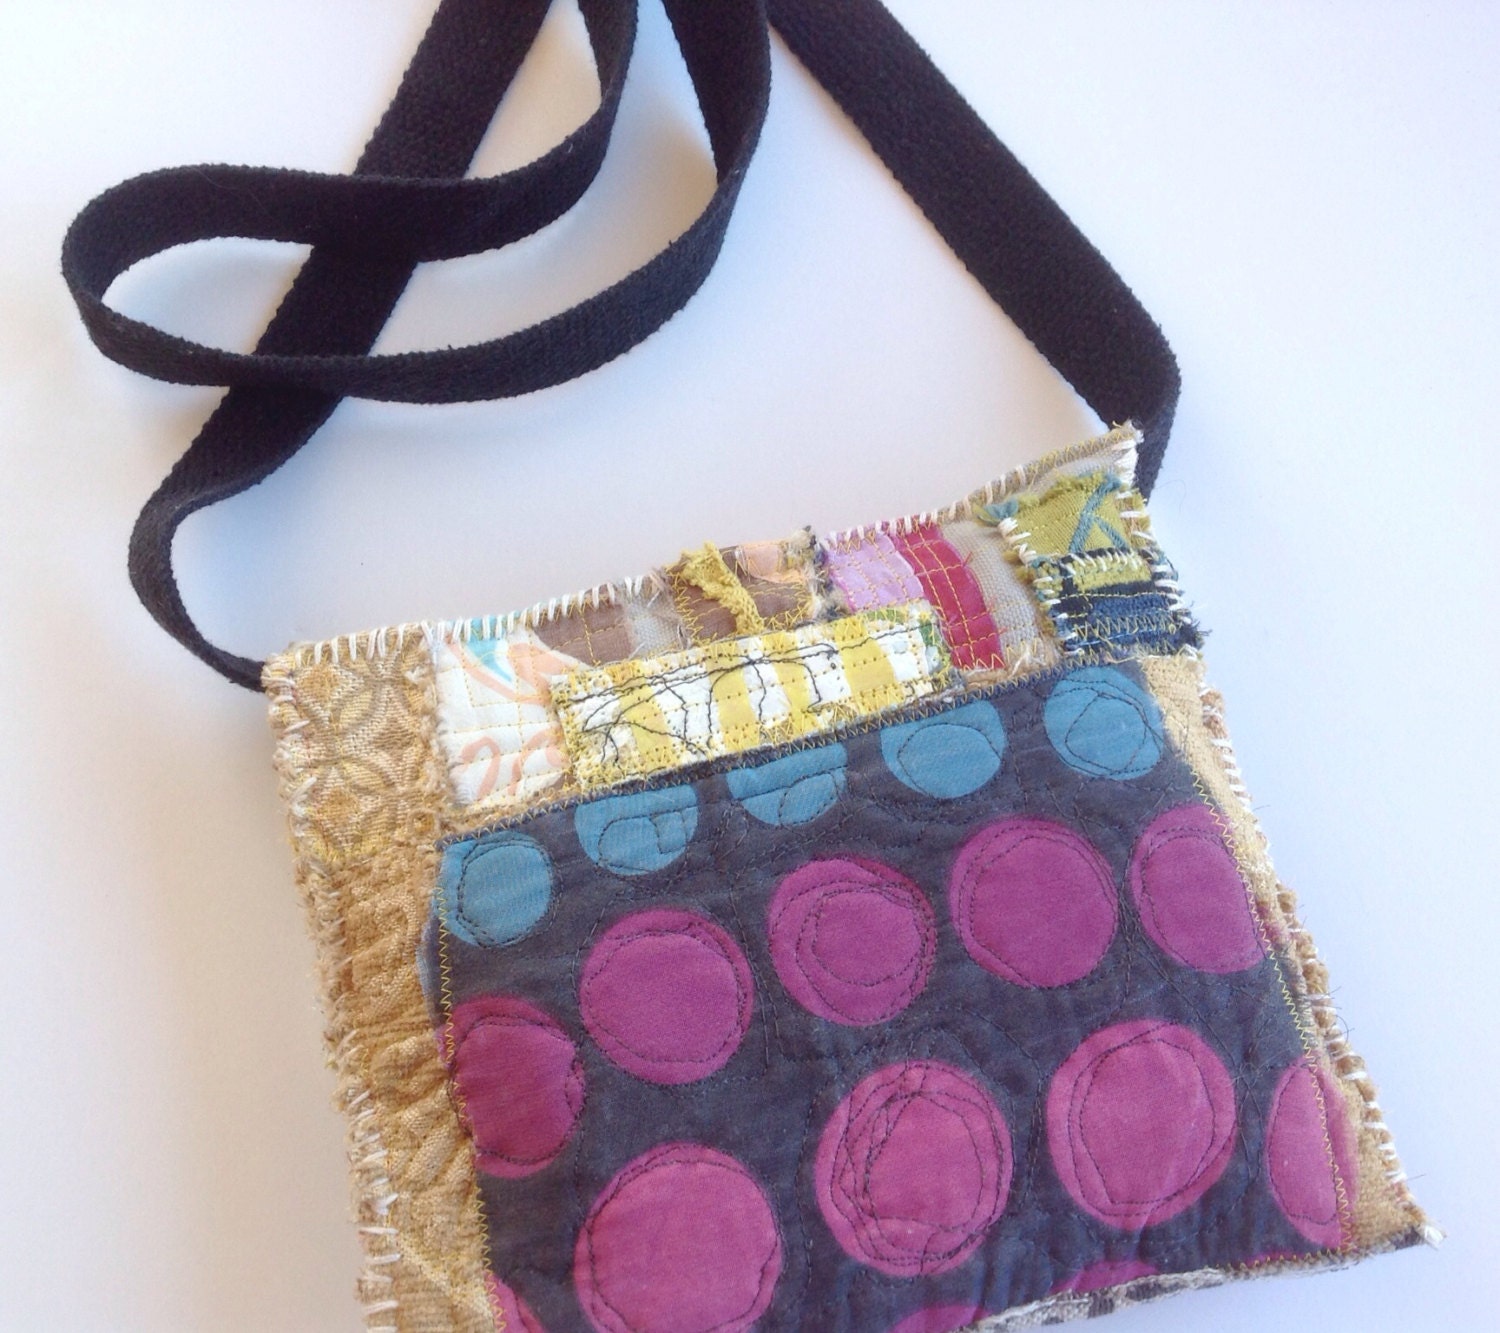 Collaged Textile Art Bag Upcycled One of a Kind Crossbody Bag